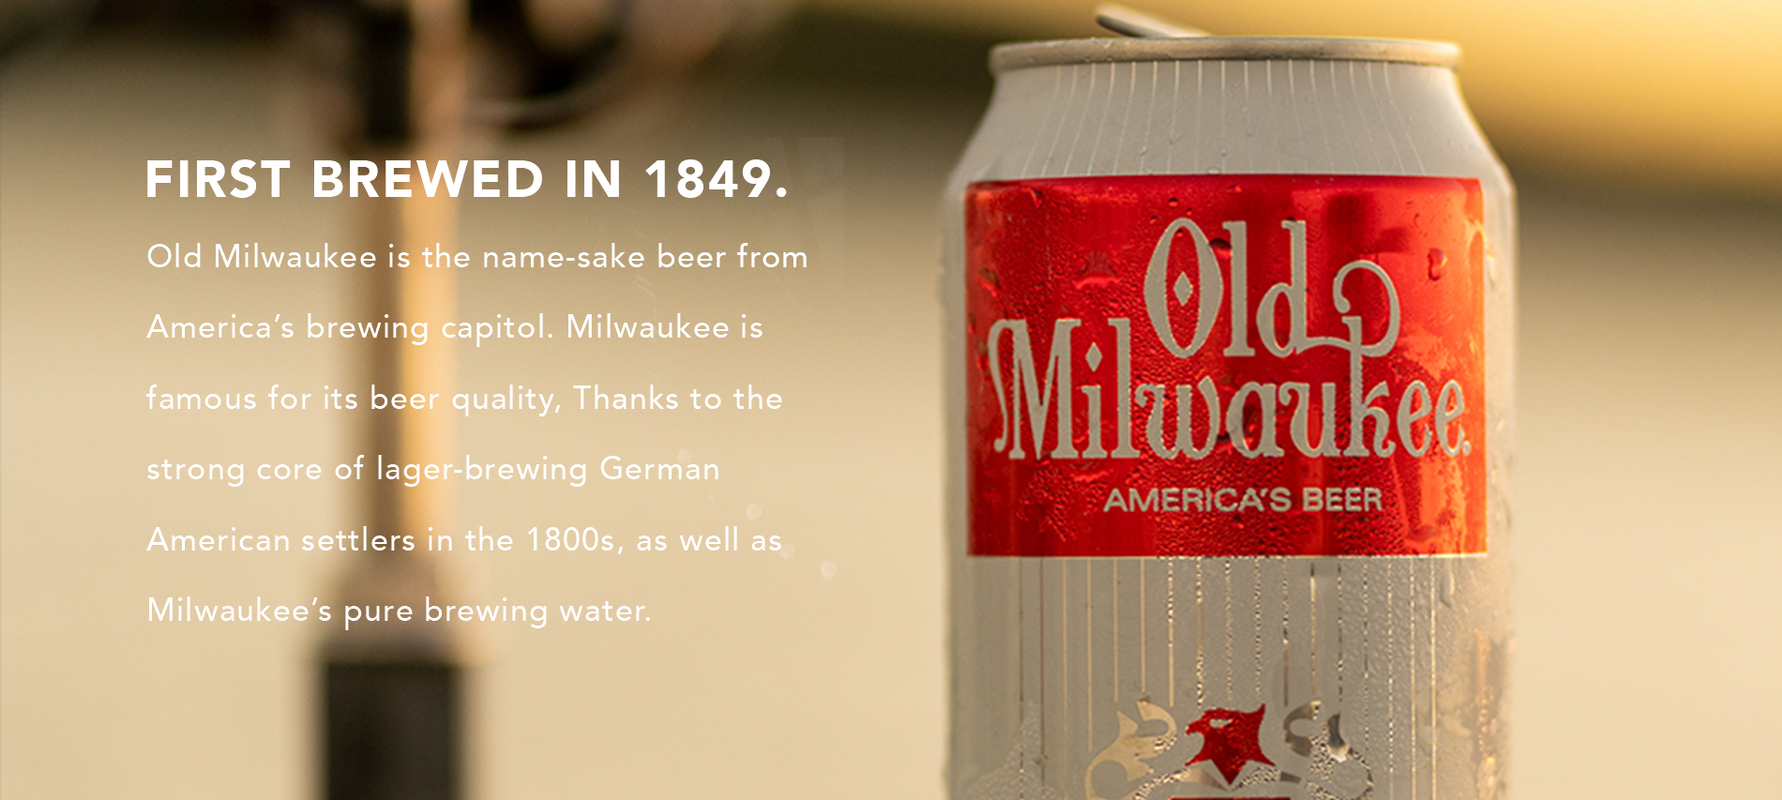 old milwaukee beer with golden blurred background and text next to it 